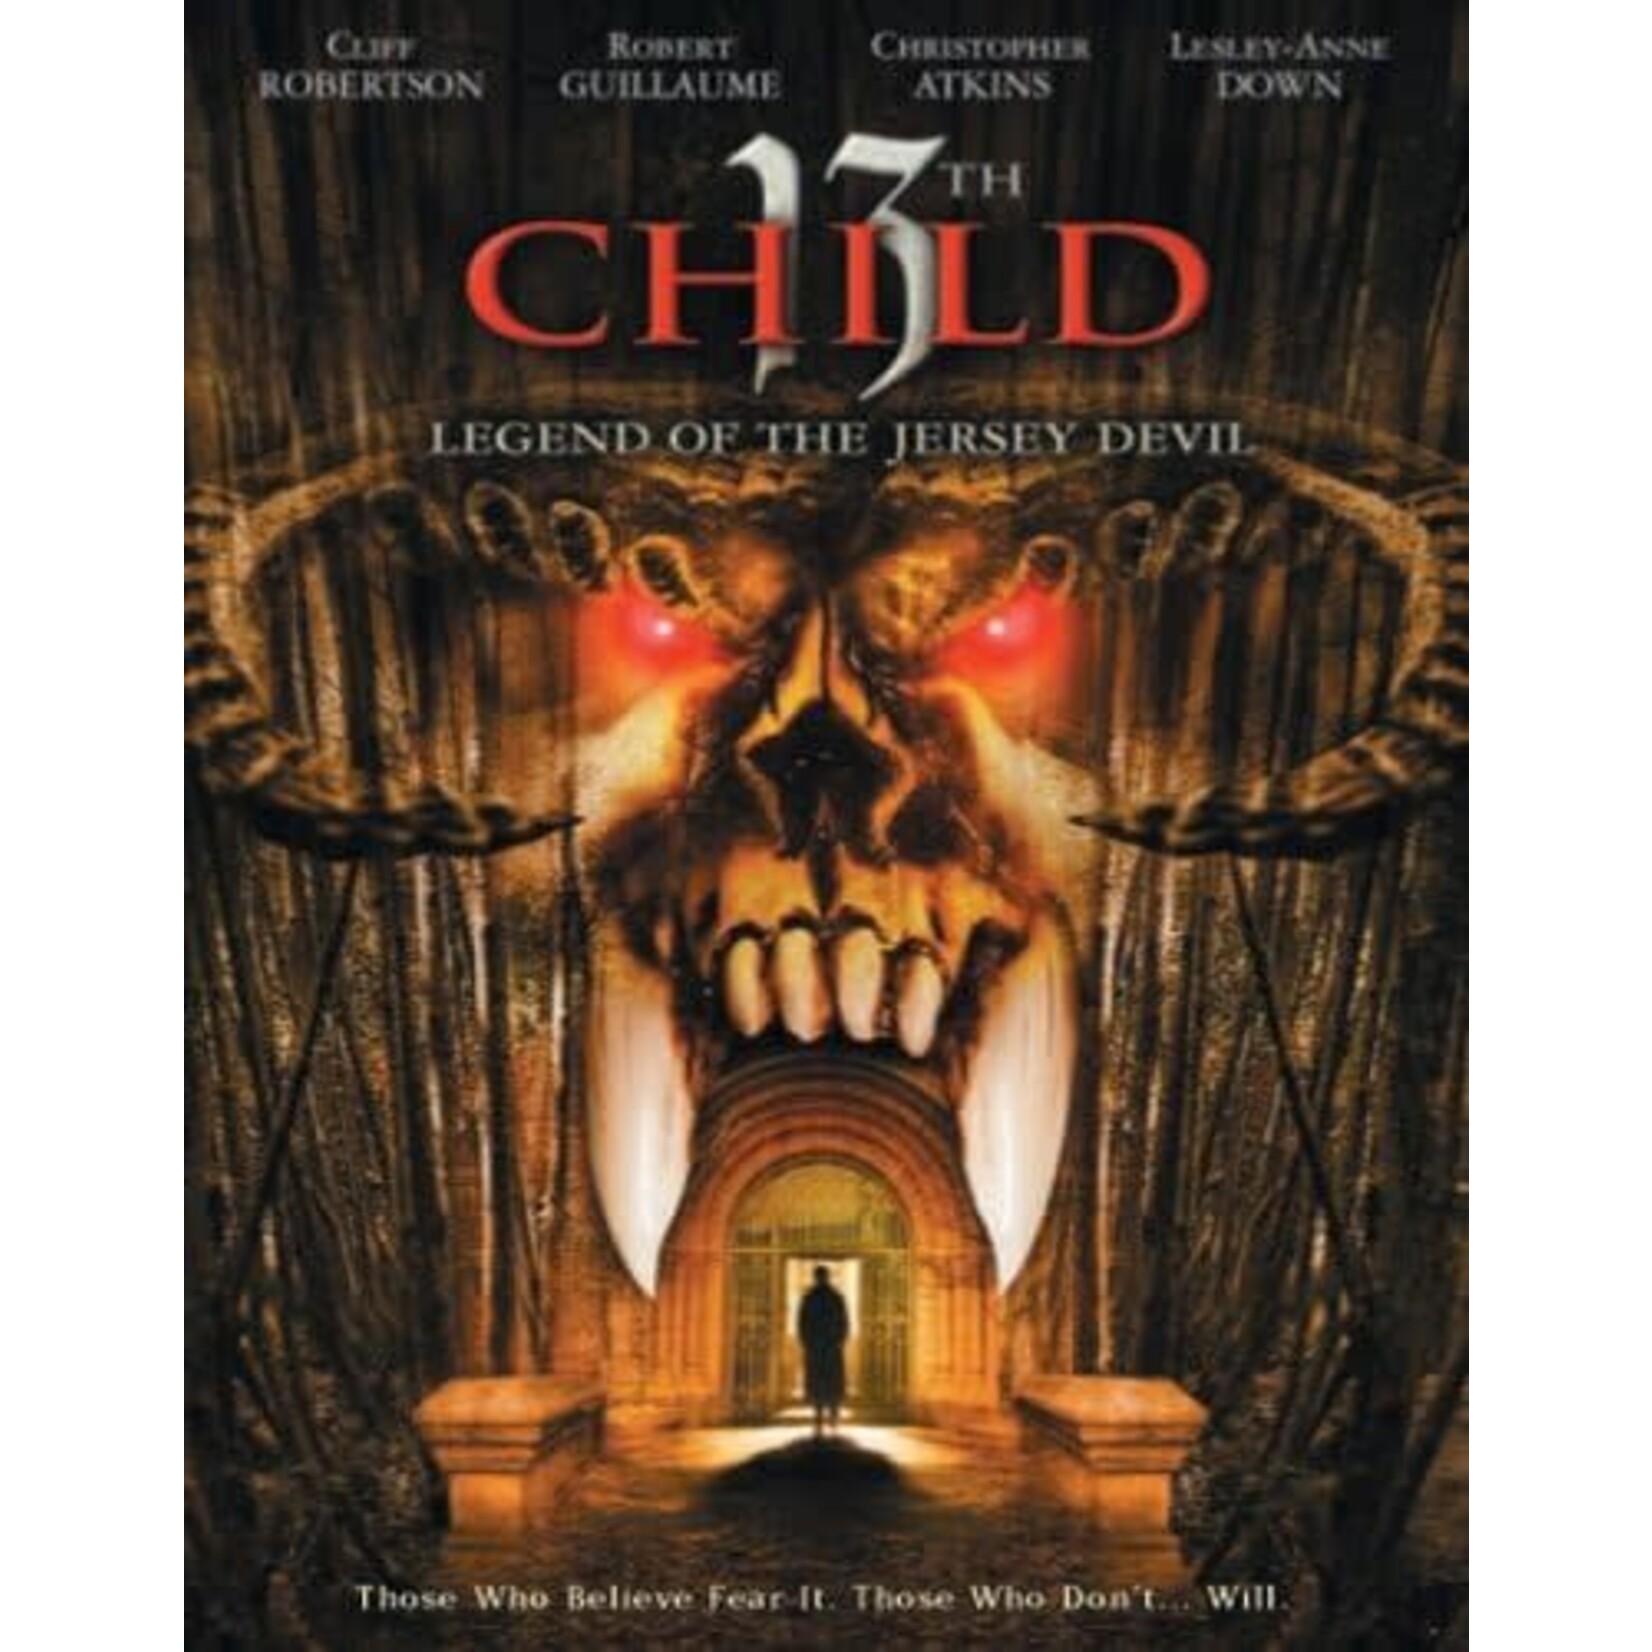 13th Child: Legend Of The Jersey Devil (2002) [USED DVD]